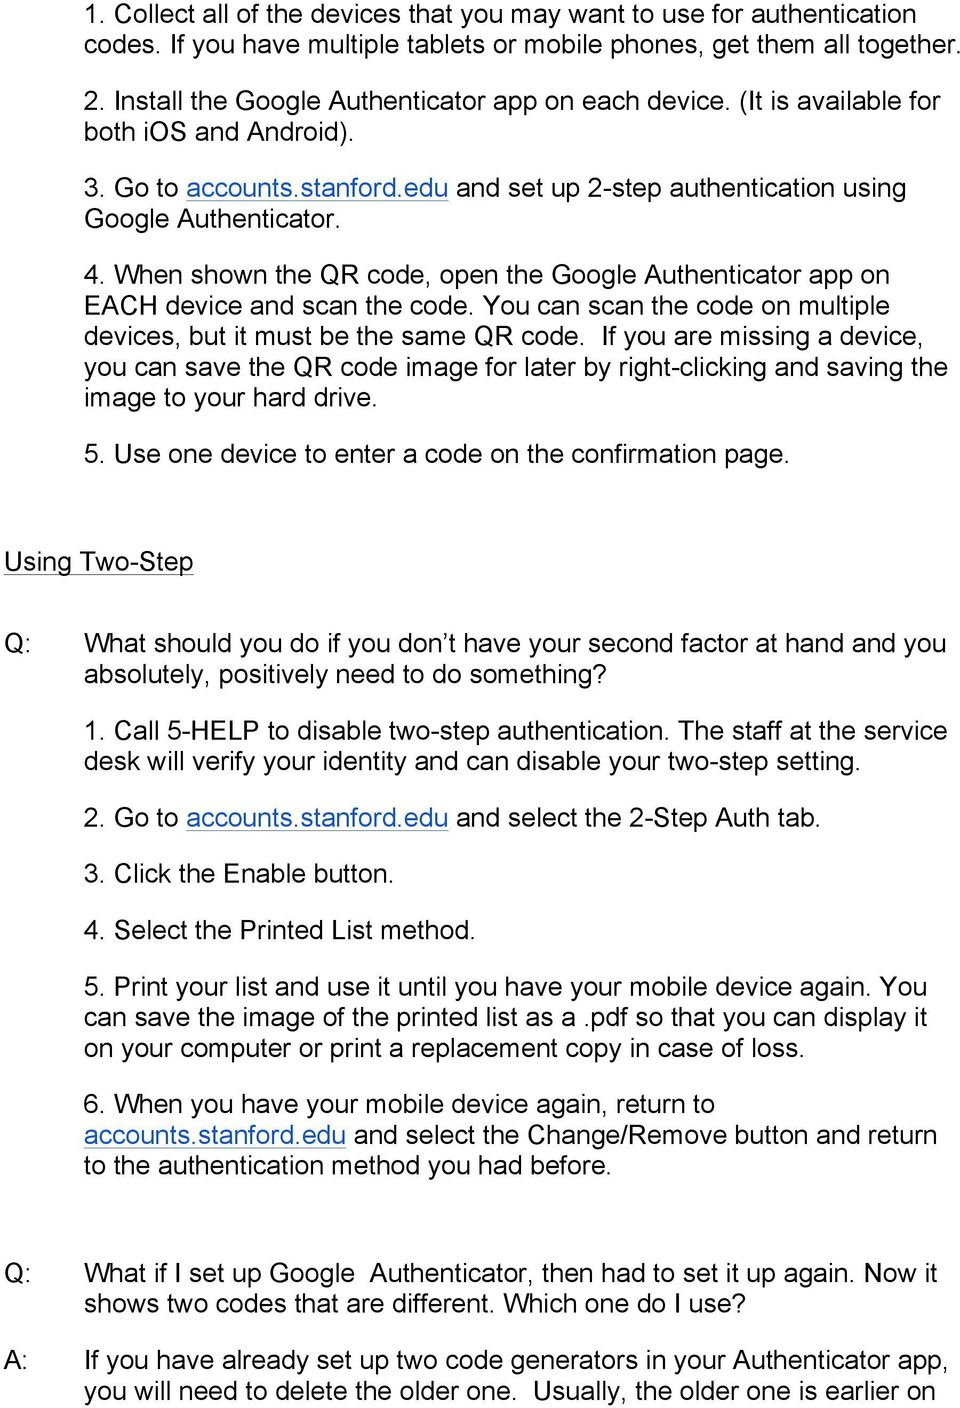 When shown the QR code, open the Google Authenticator app on EACH device and scan the code. You can scan the code on multiple devices, but it must be the same QR code.